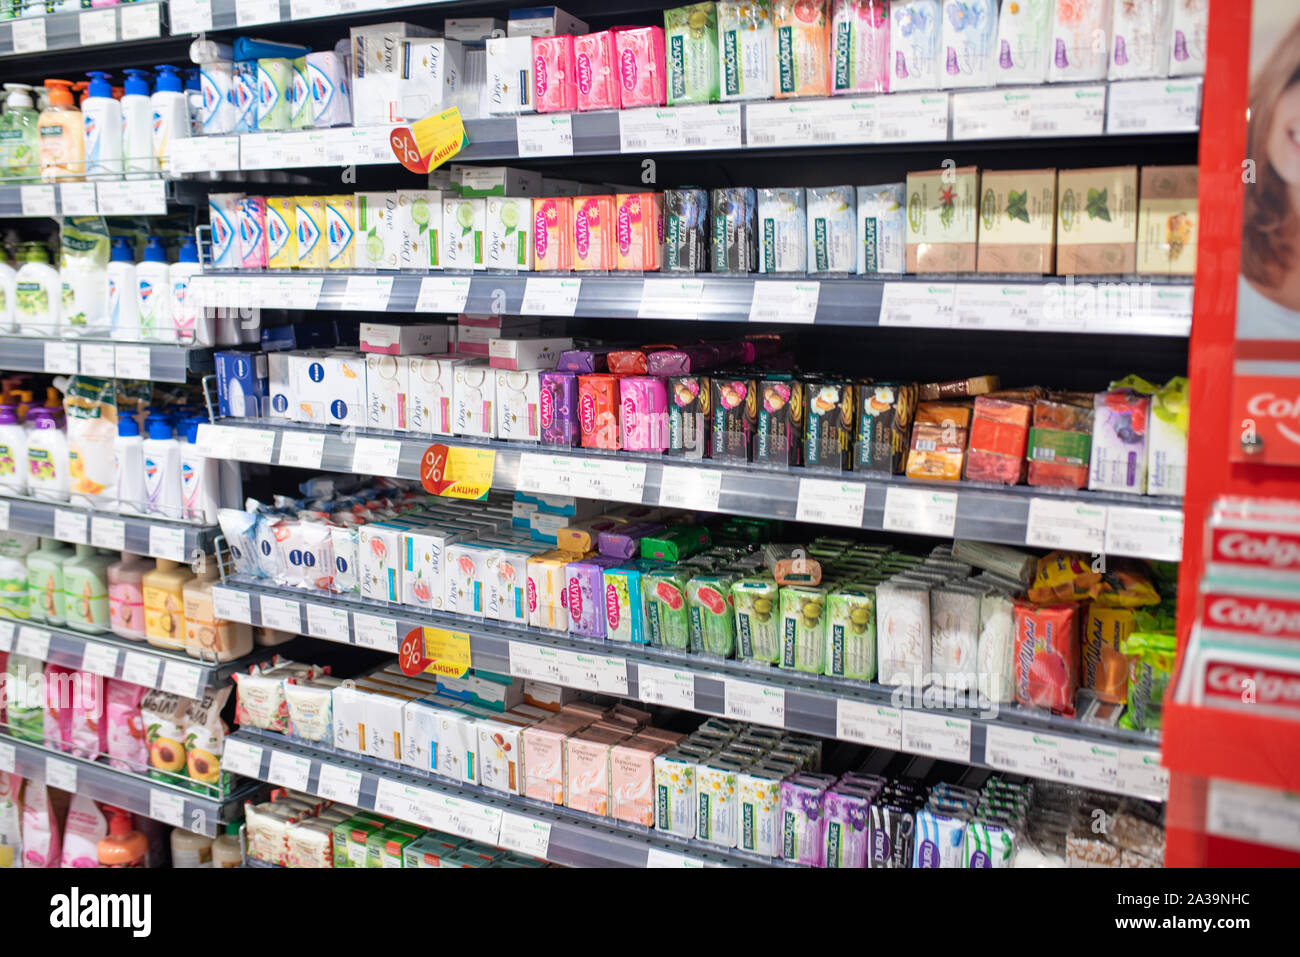 Minsk, Belarus - September 27, 2019: Counter with various soaps in a supermarket. Stock Photo